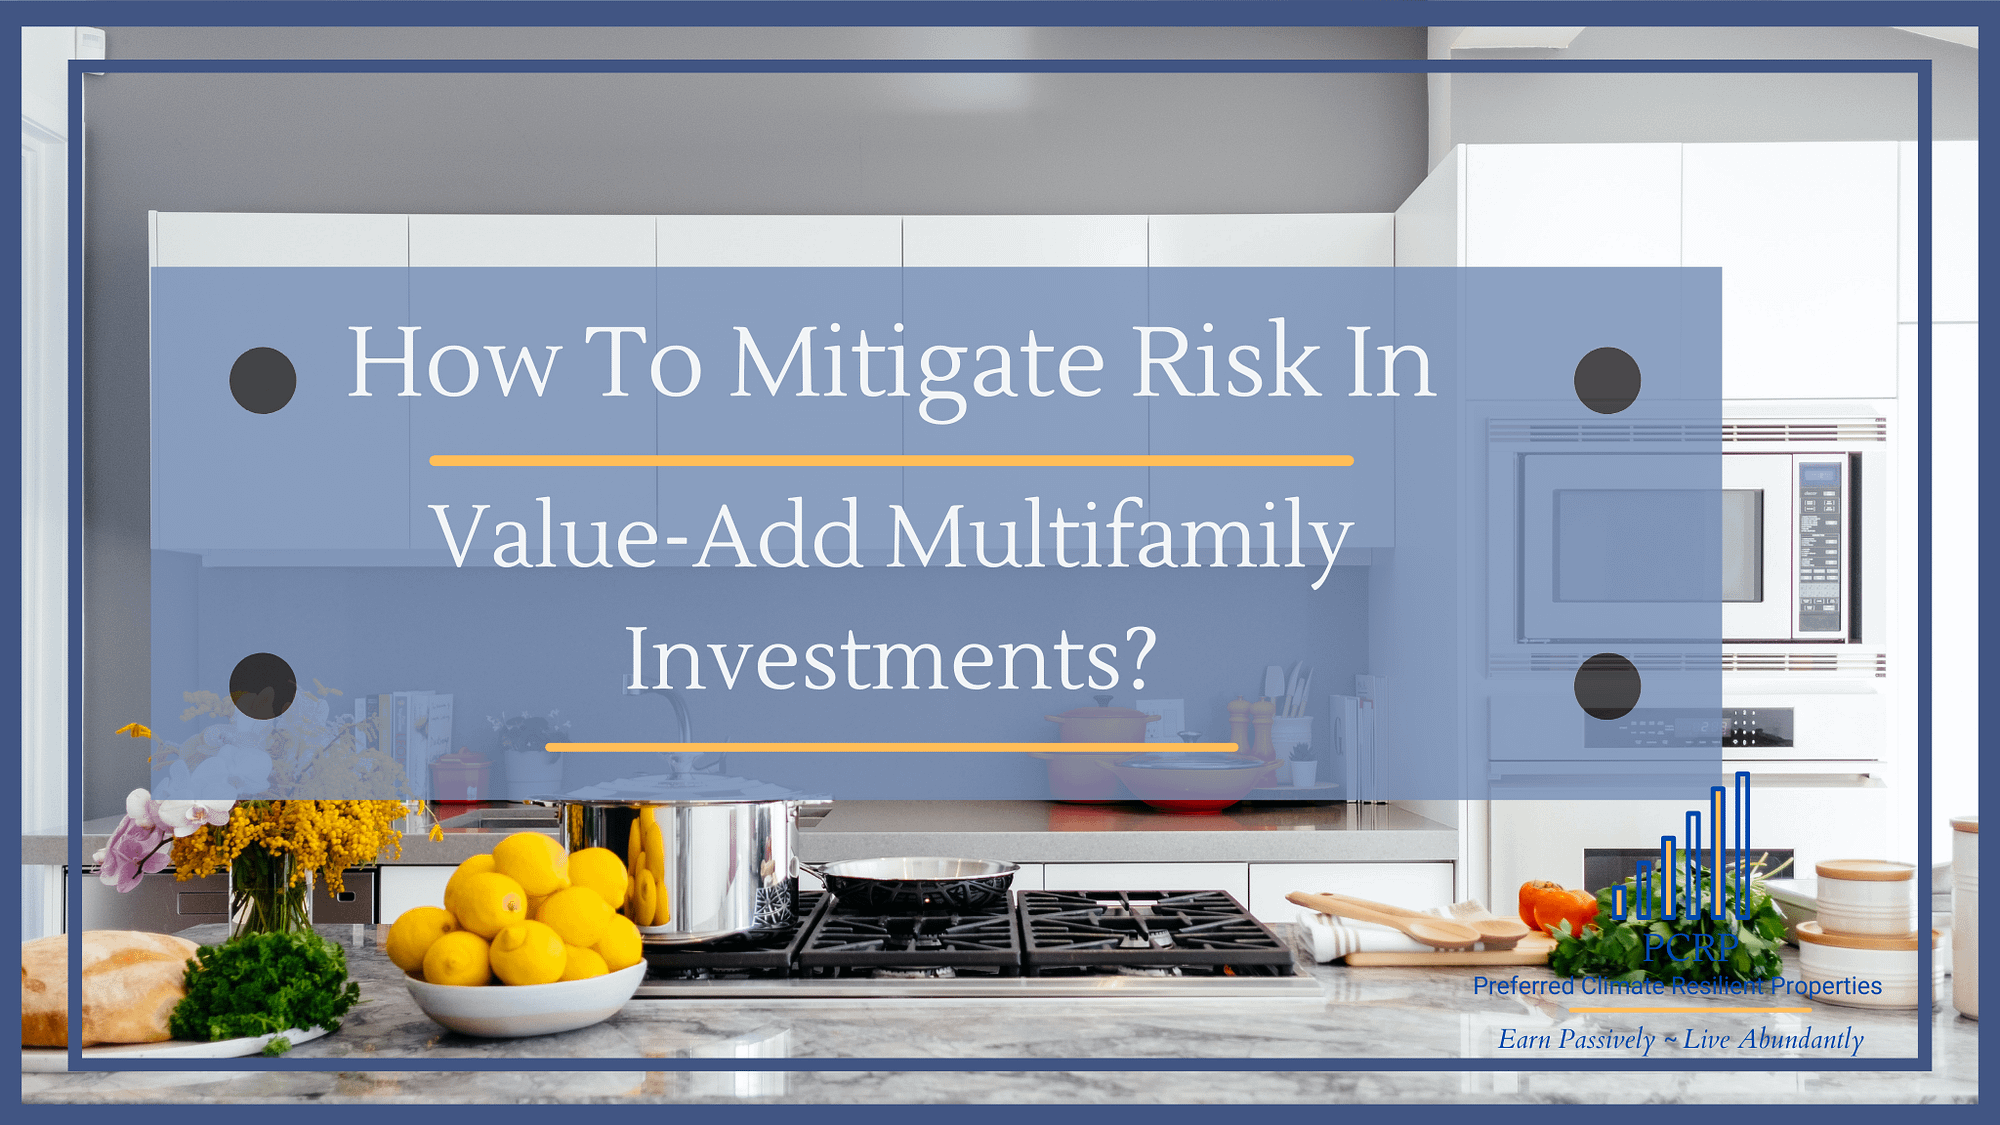 How to mitigate risk with value-add multifamily investments